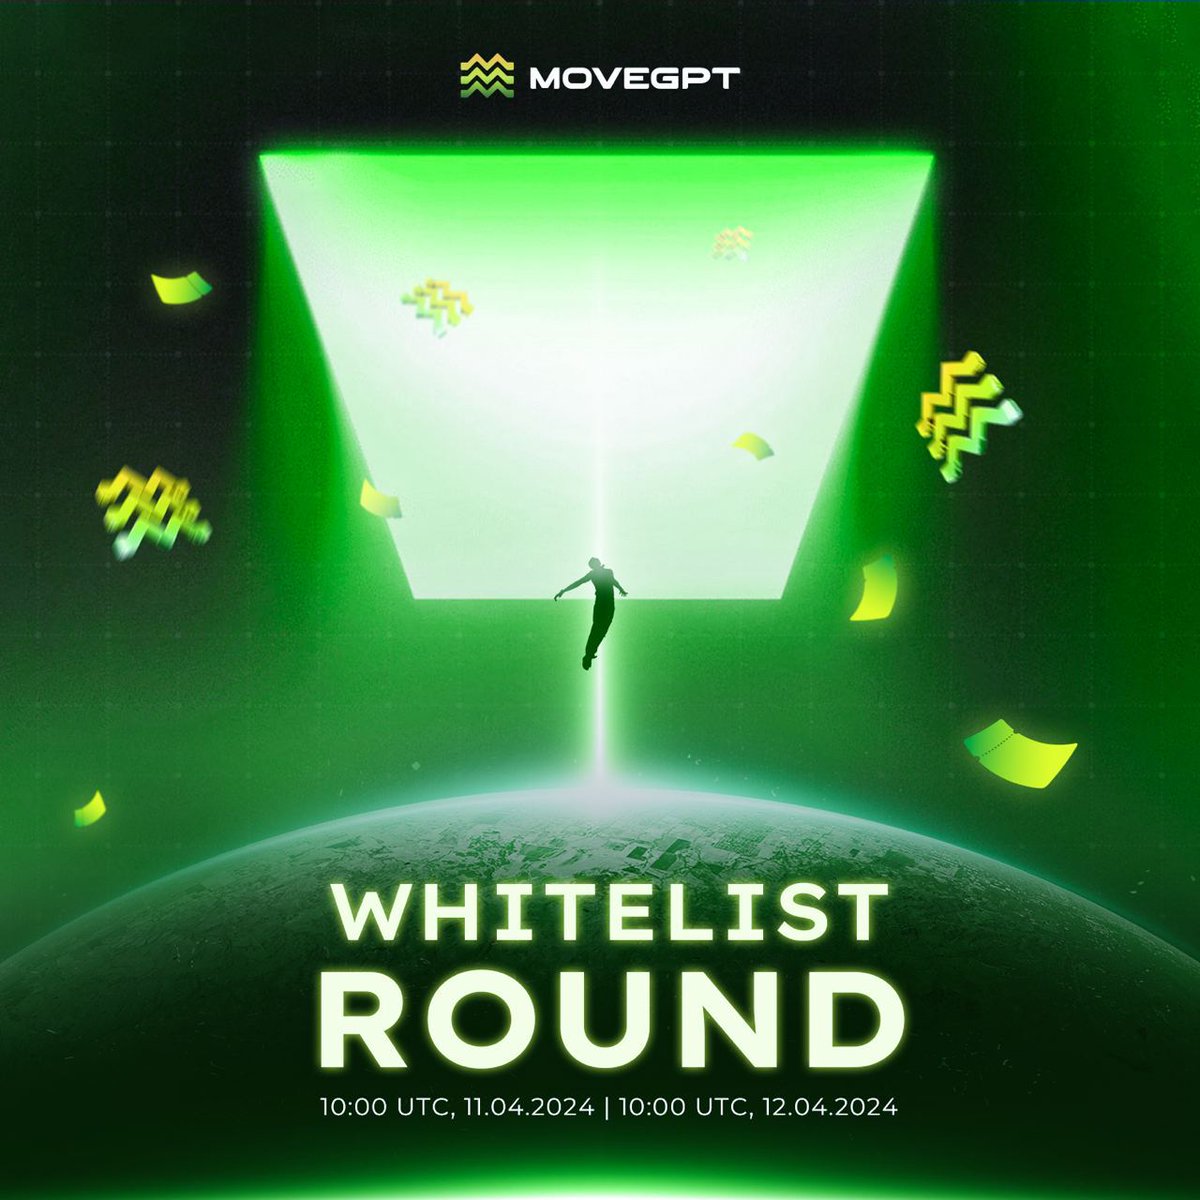 ⭐️MoveGPT IDO: Whitelist Round OPENED ⭐️ Here comes the Time 🔥 We're thrilled to announce that the MGPT Whitelist round is now LIVE! - Timeline: 11:00 UTC, 11 April - 10:00 UTC, 12 April - Funding Method: APT 🌊 MOVE WITH US NOW: launchpad.movegpt.io/launchpad